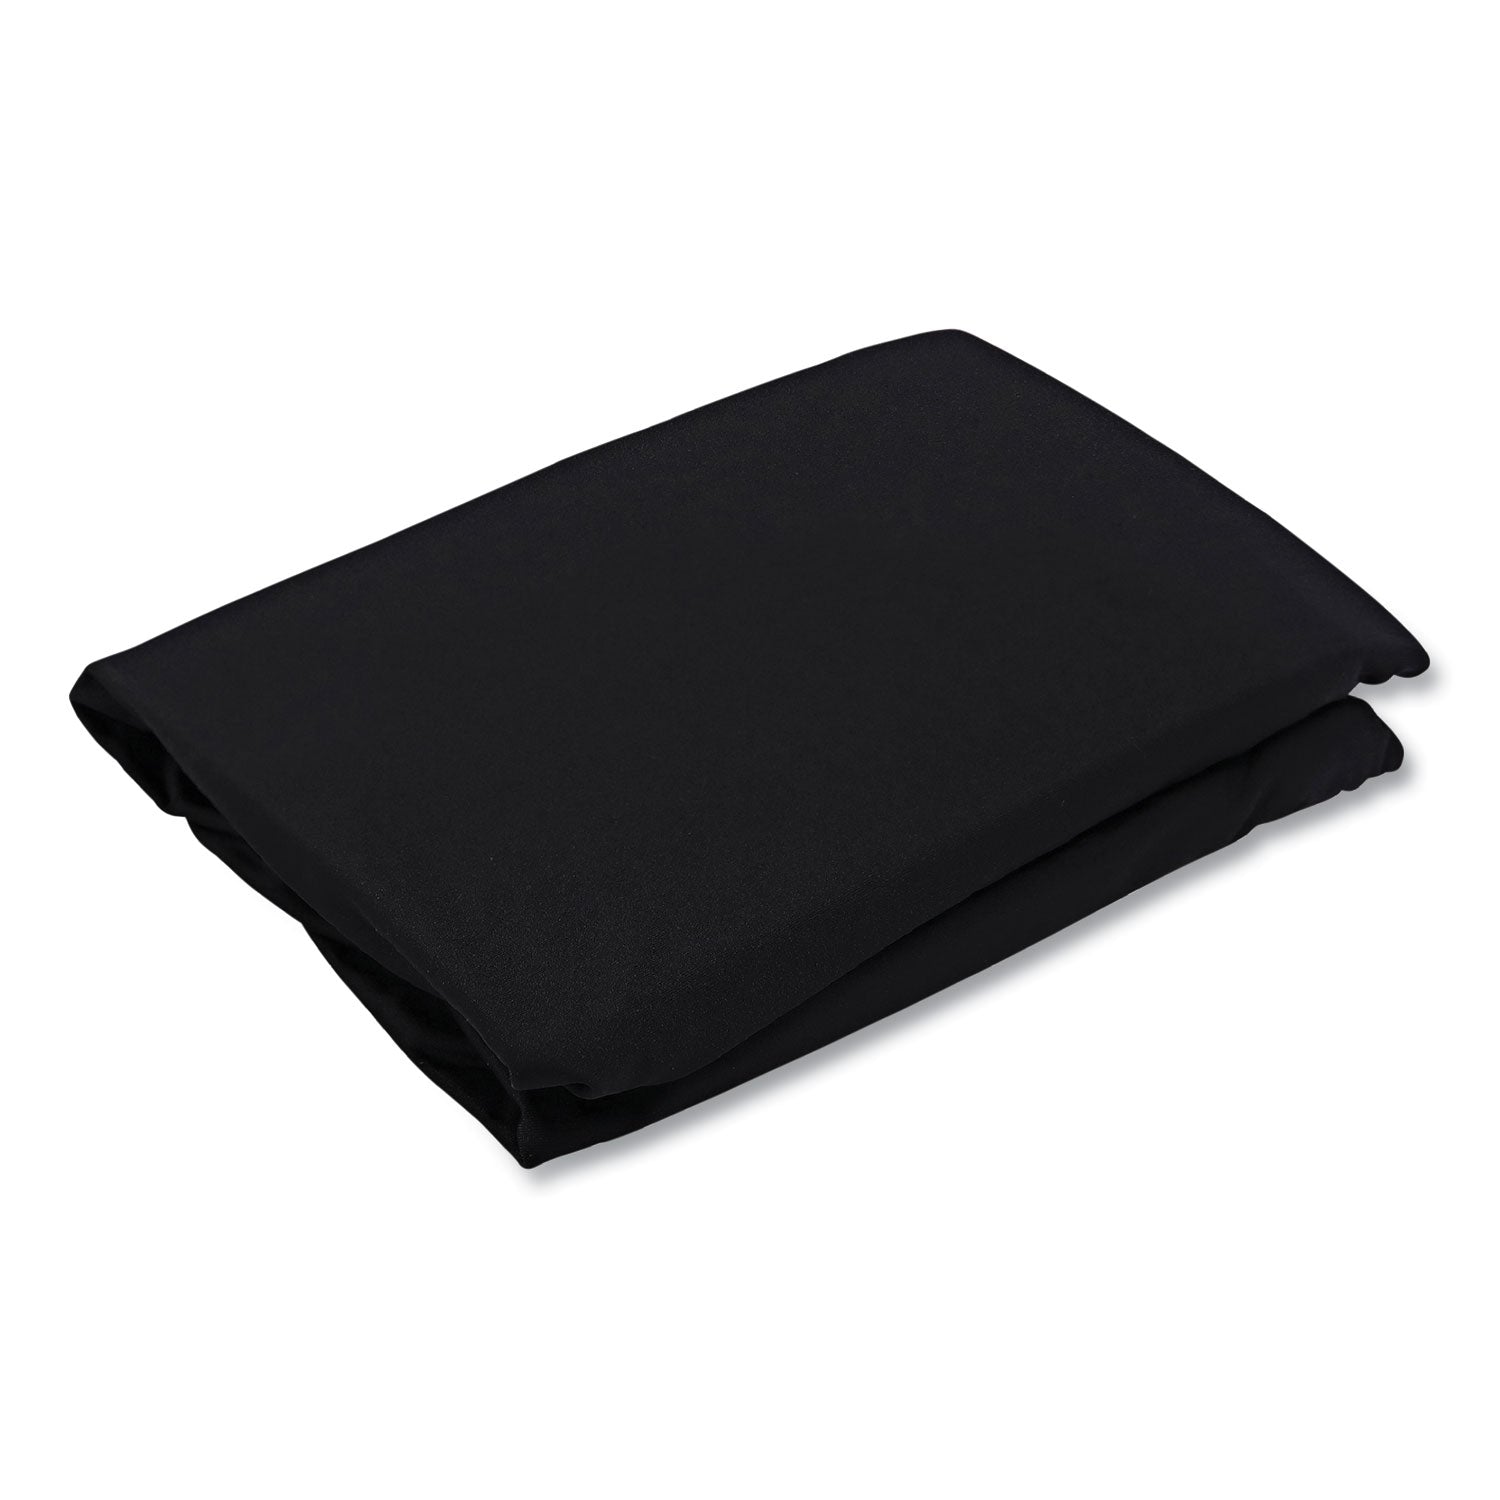 igear-fabric-table-top-cap-cover-polyester-30-x-96-black_ice16631 - 1